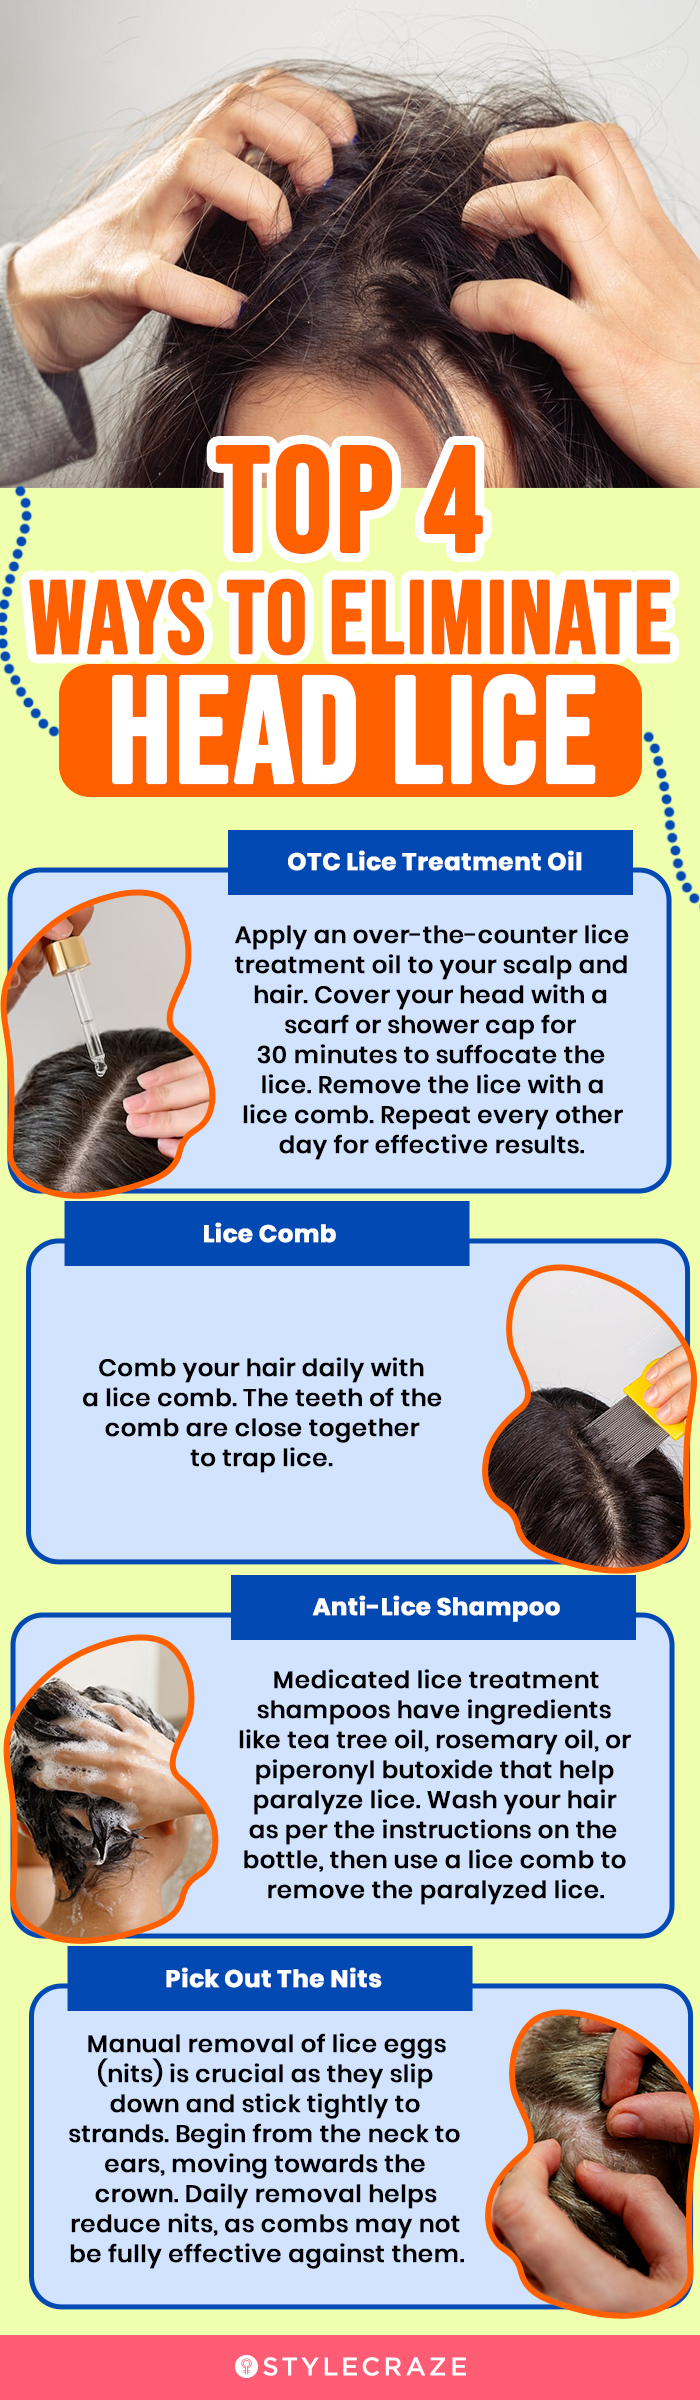 top 4 ways to reduce head lice (infographic)